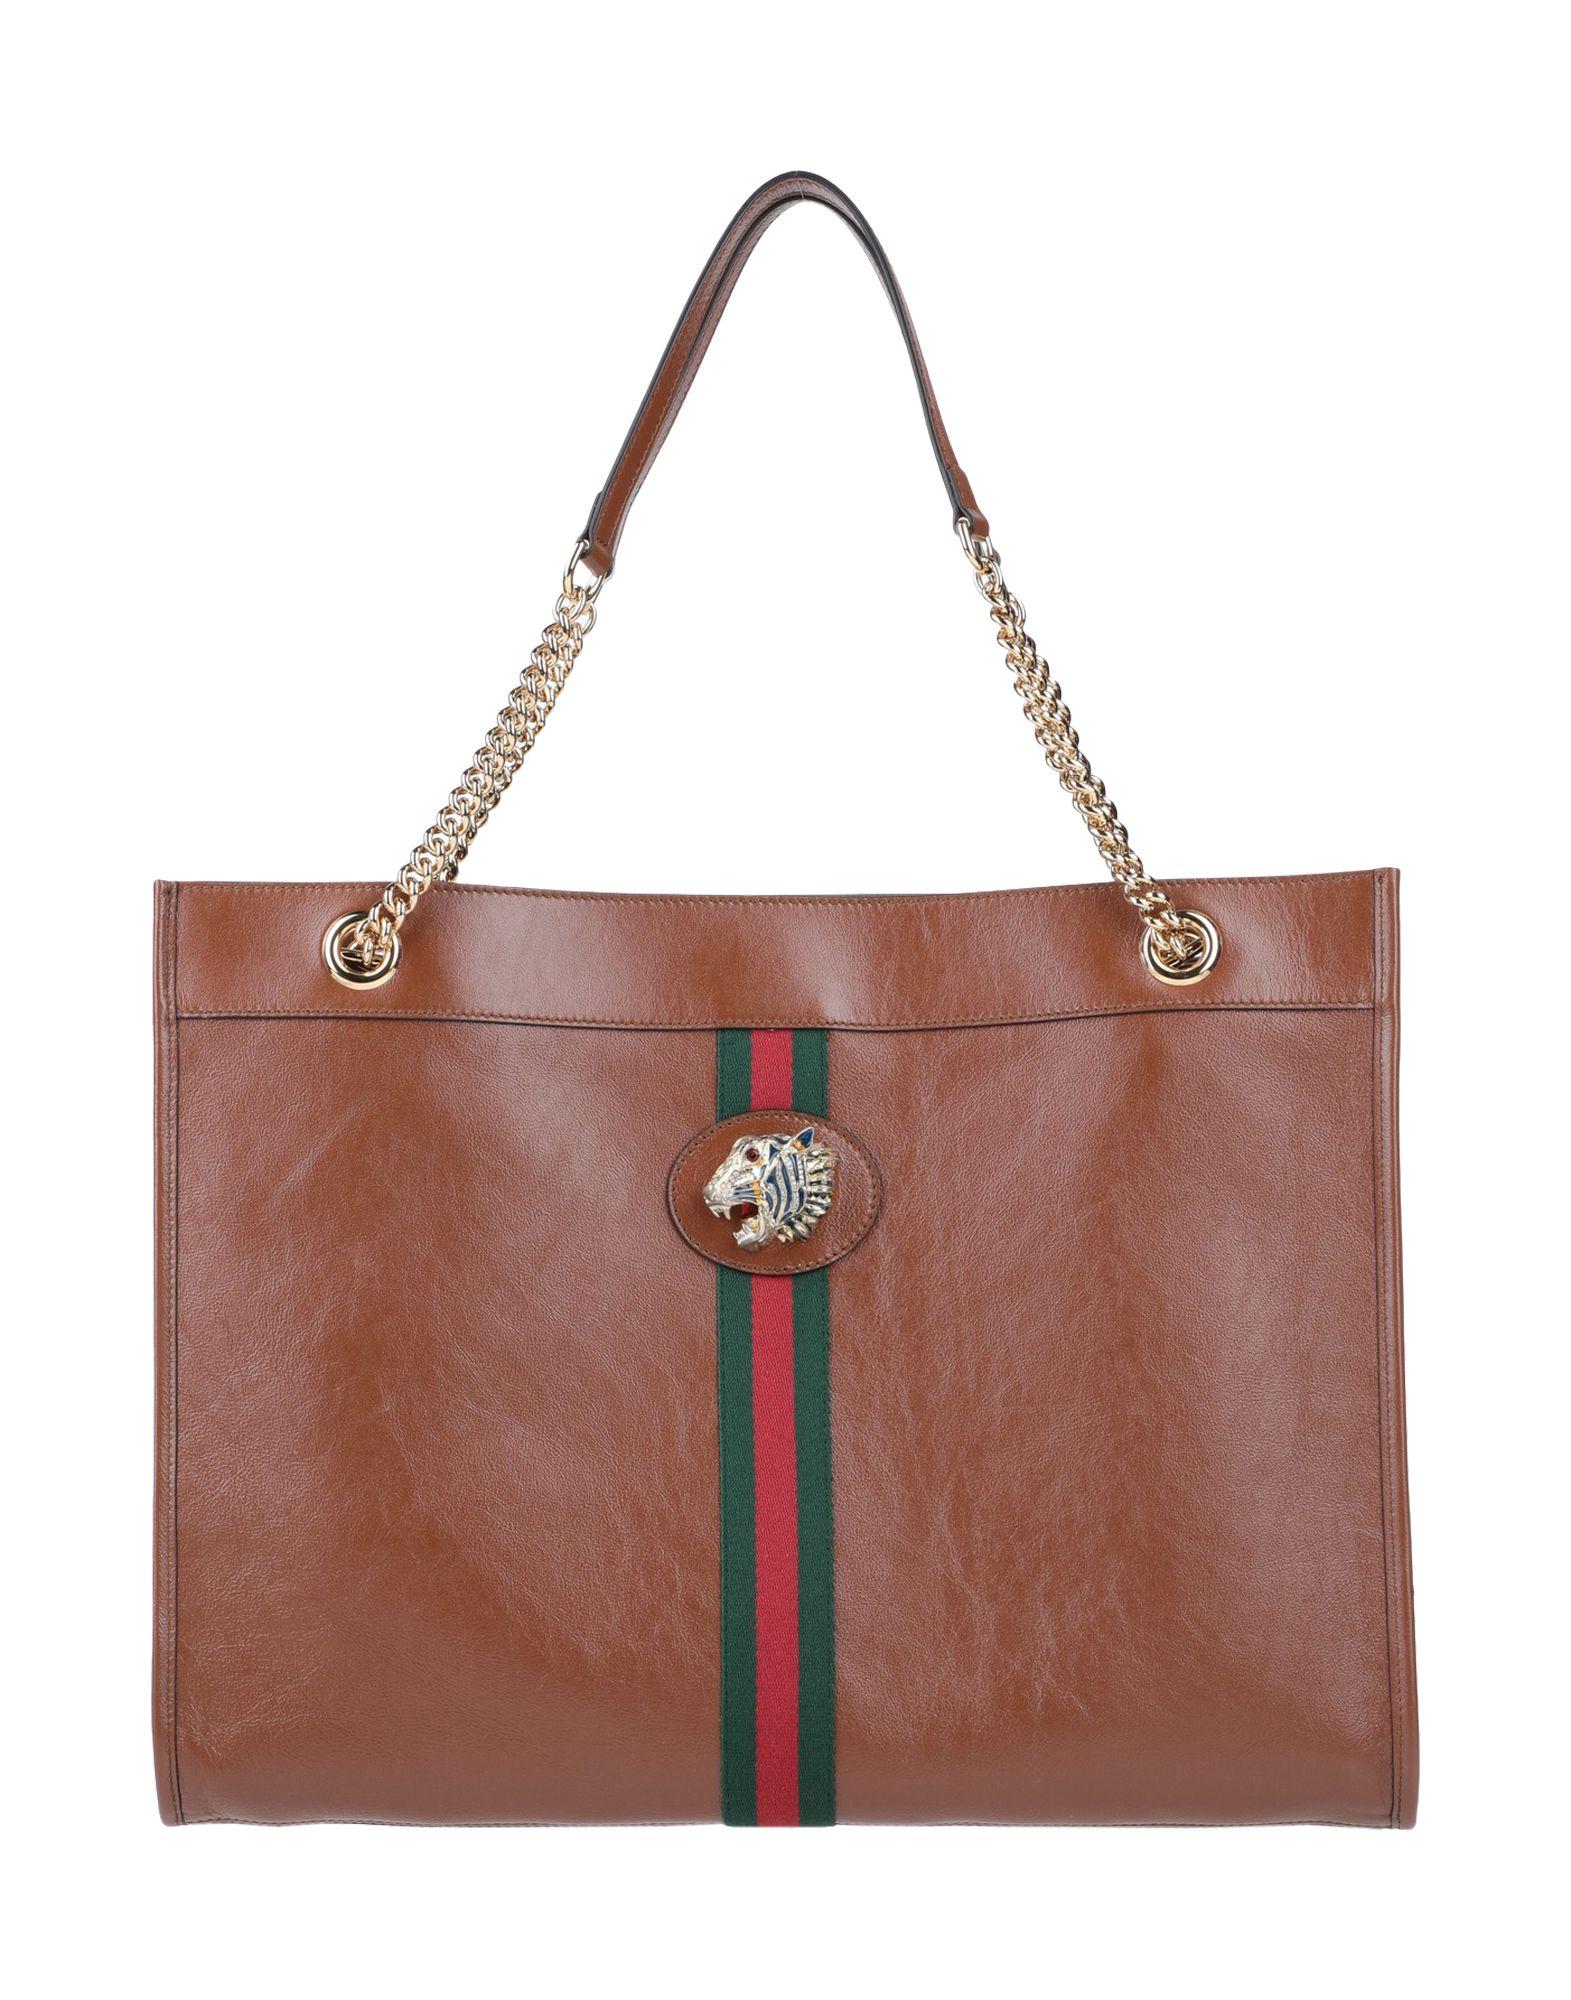 Gucci Rajah Large Leather Tote in Brown | Lyst